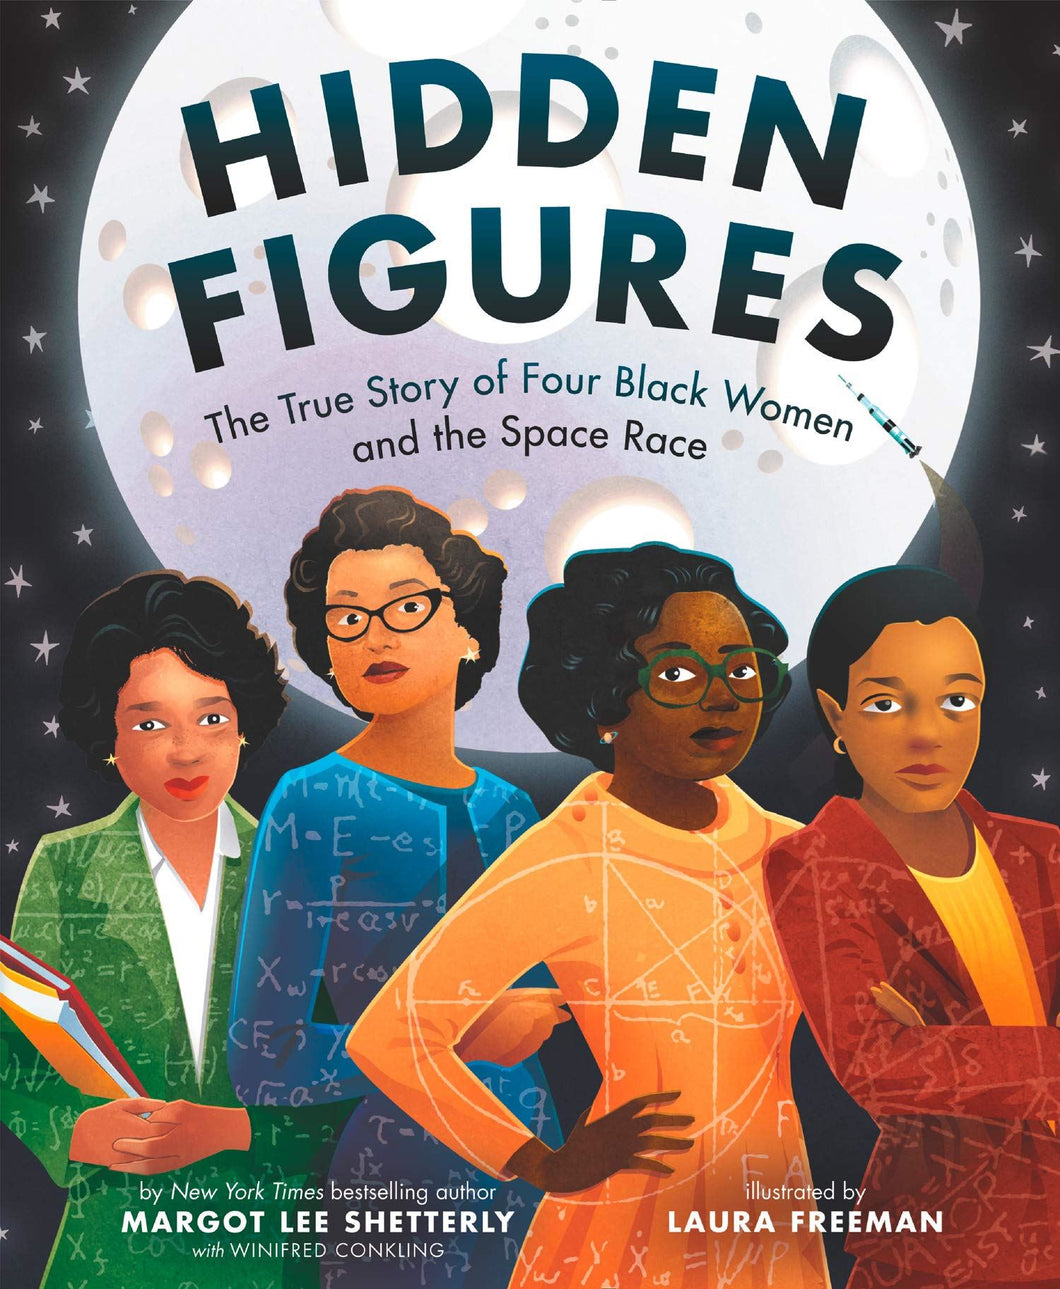 Hidden Figures book cover shows illustrations of four Black women with mathematical figures on their colourful clothes. In the background is a moon and a rocket. Cover reads 